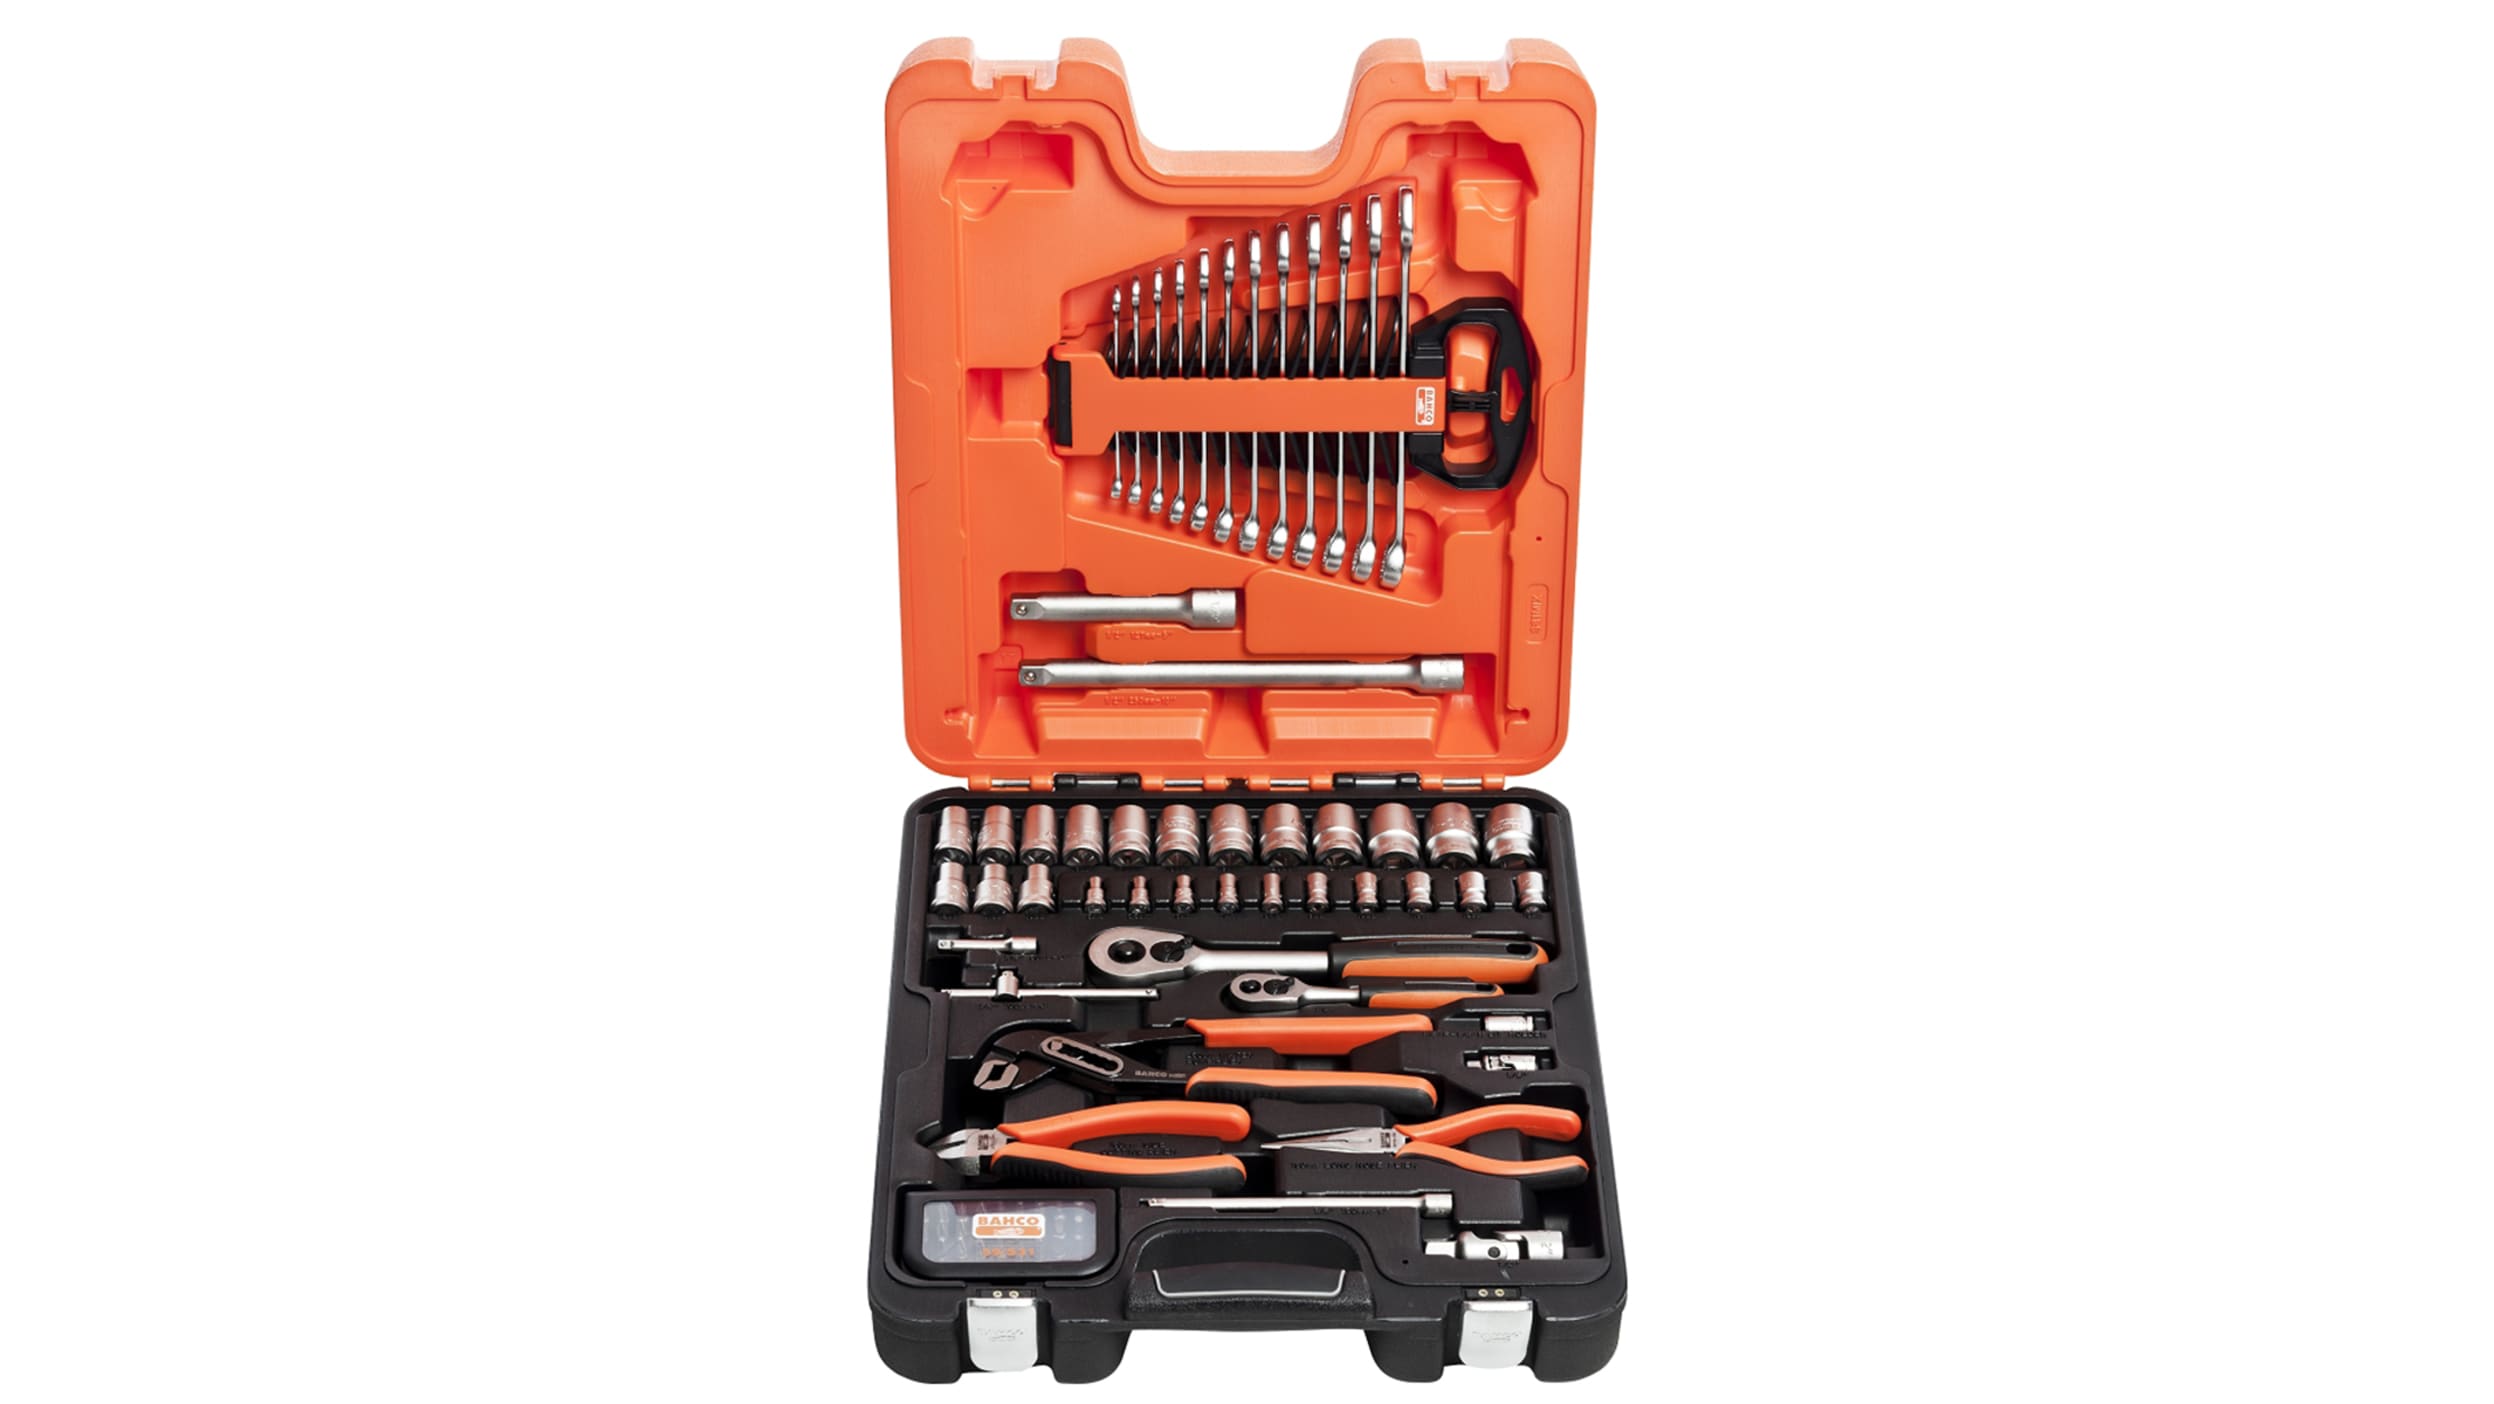 Tool Set Review: The Best Tools for Every DIY Project